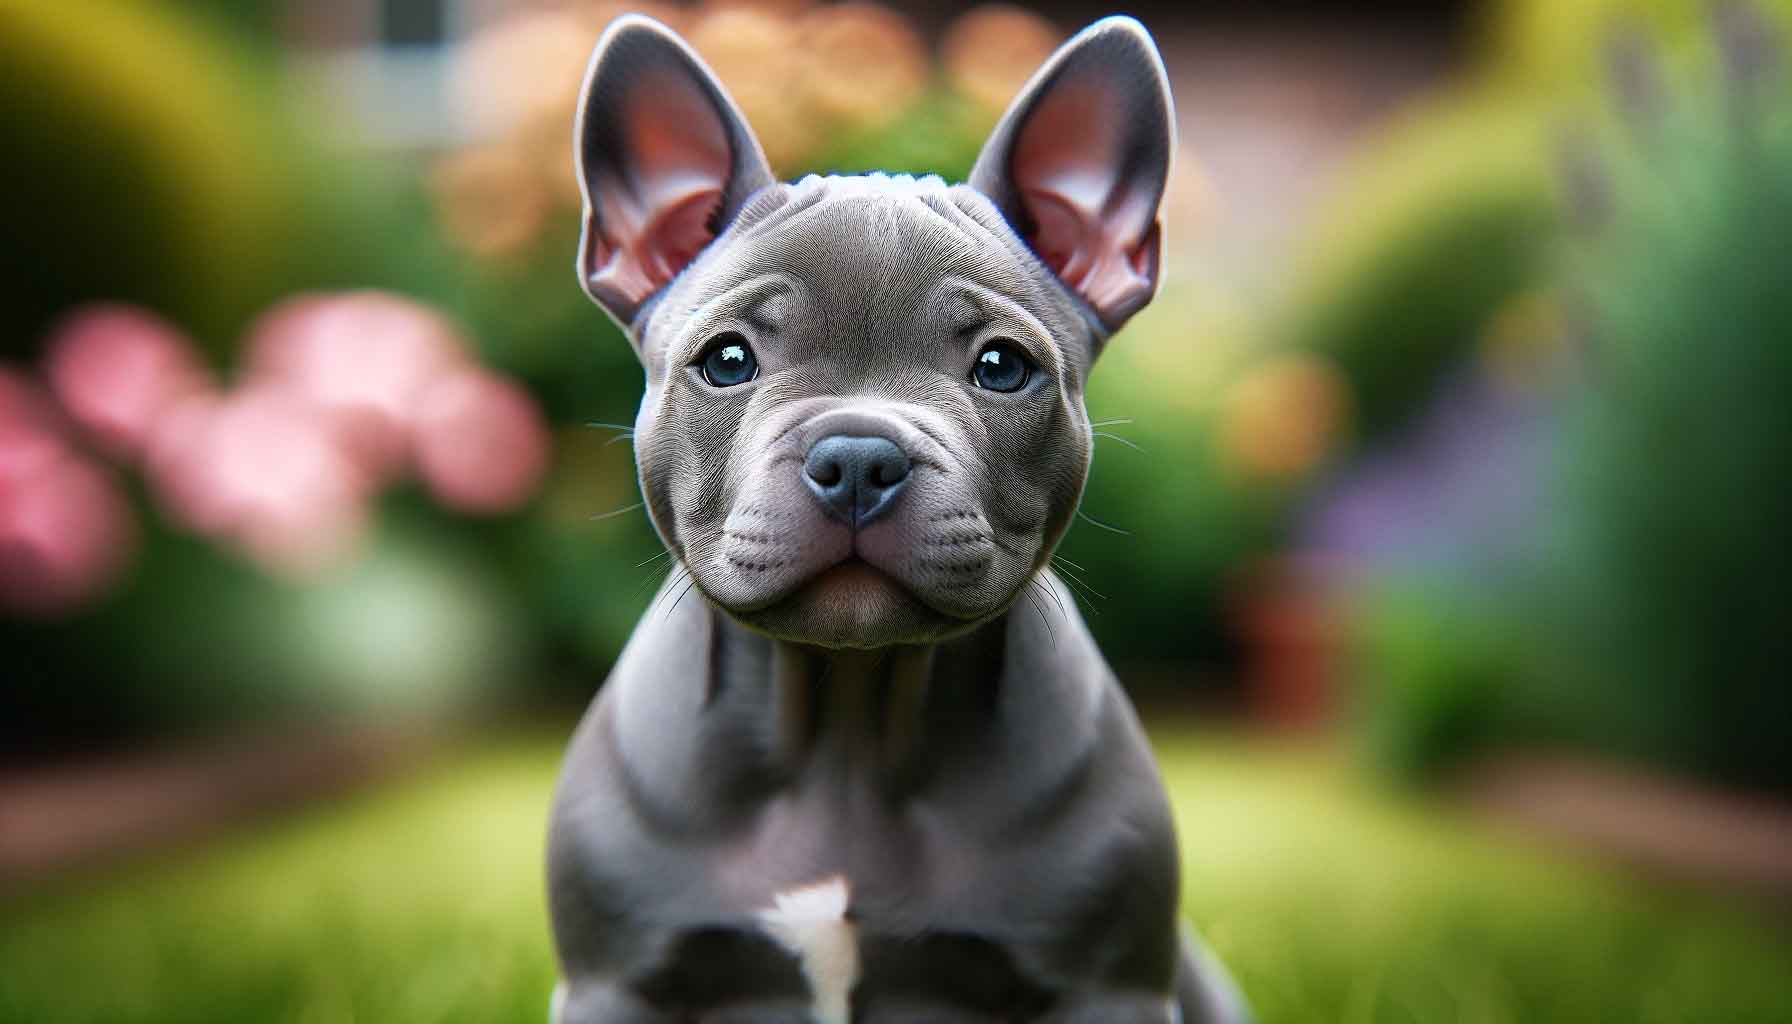 A close-up photograph of a blue fawn micro bully dog, highlighting the unique silver grey coat that often appears blue. The dog's compact, muscular body and short, smooth fur are clear, with a gentle expression on its face.